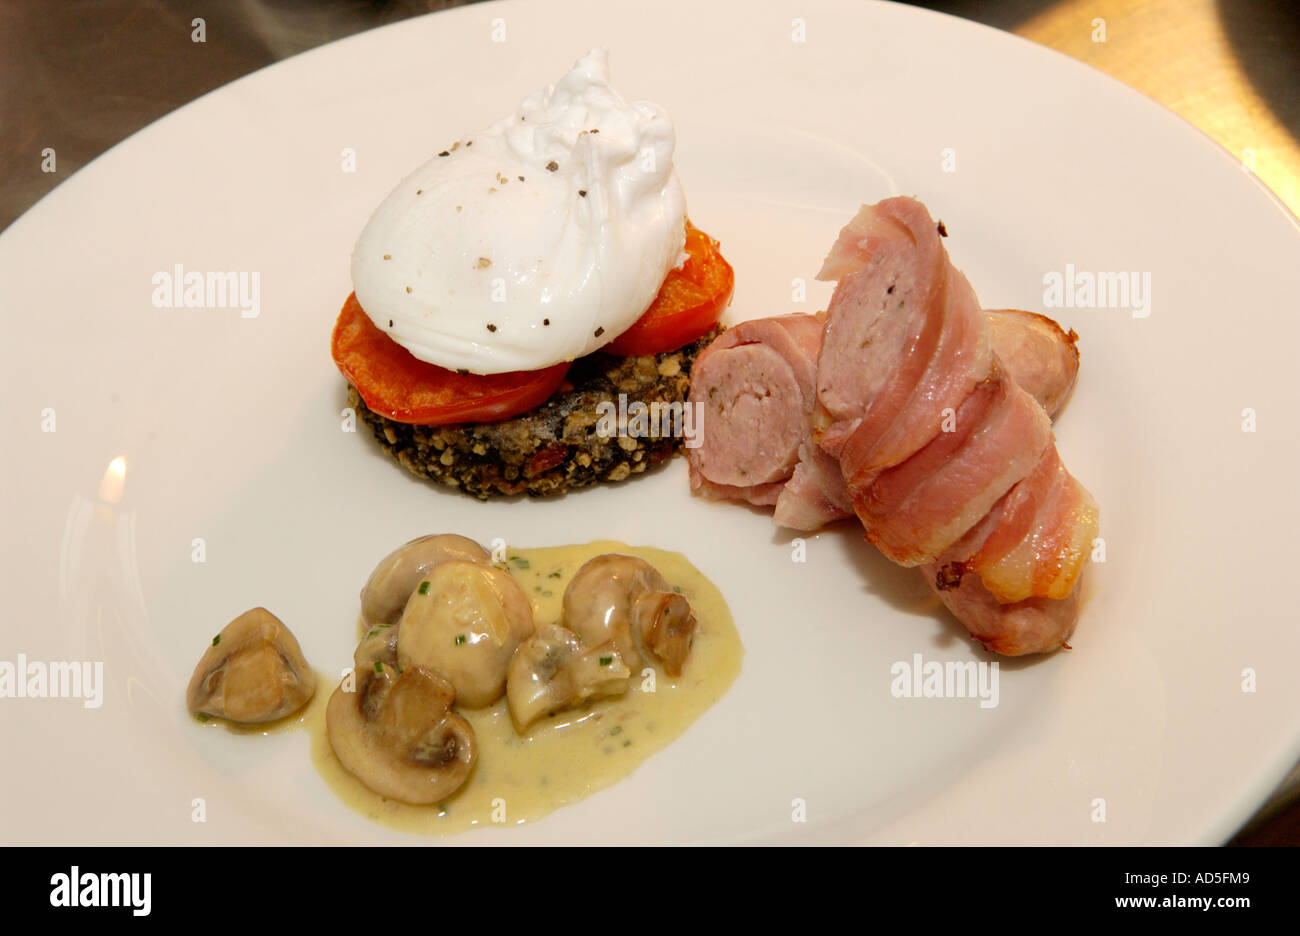 Welsh breakfast made with locally sourced produce at the Manor Hotel Crickhowell Powys Wales UK GB EU Stock Photo